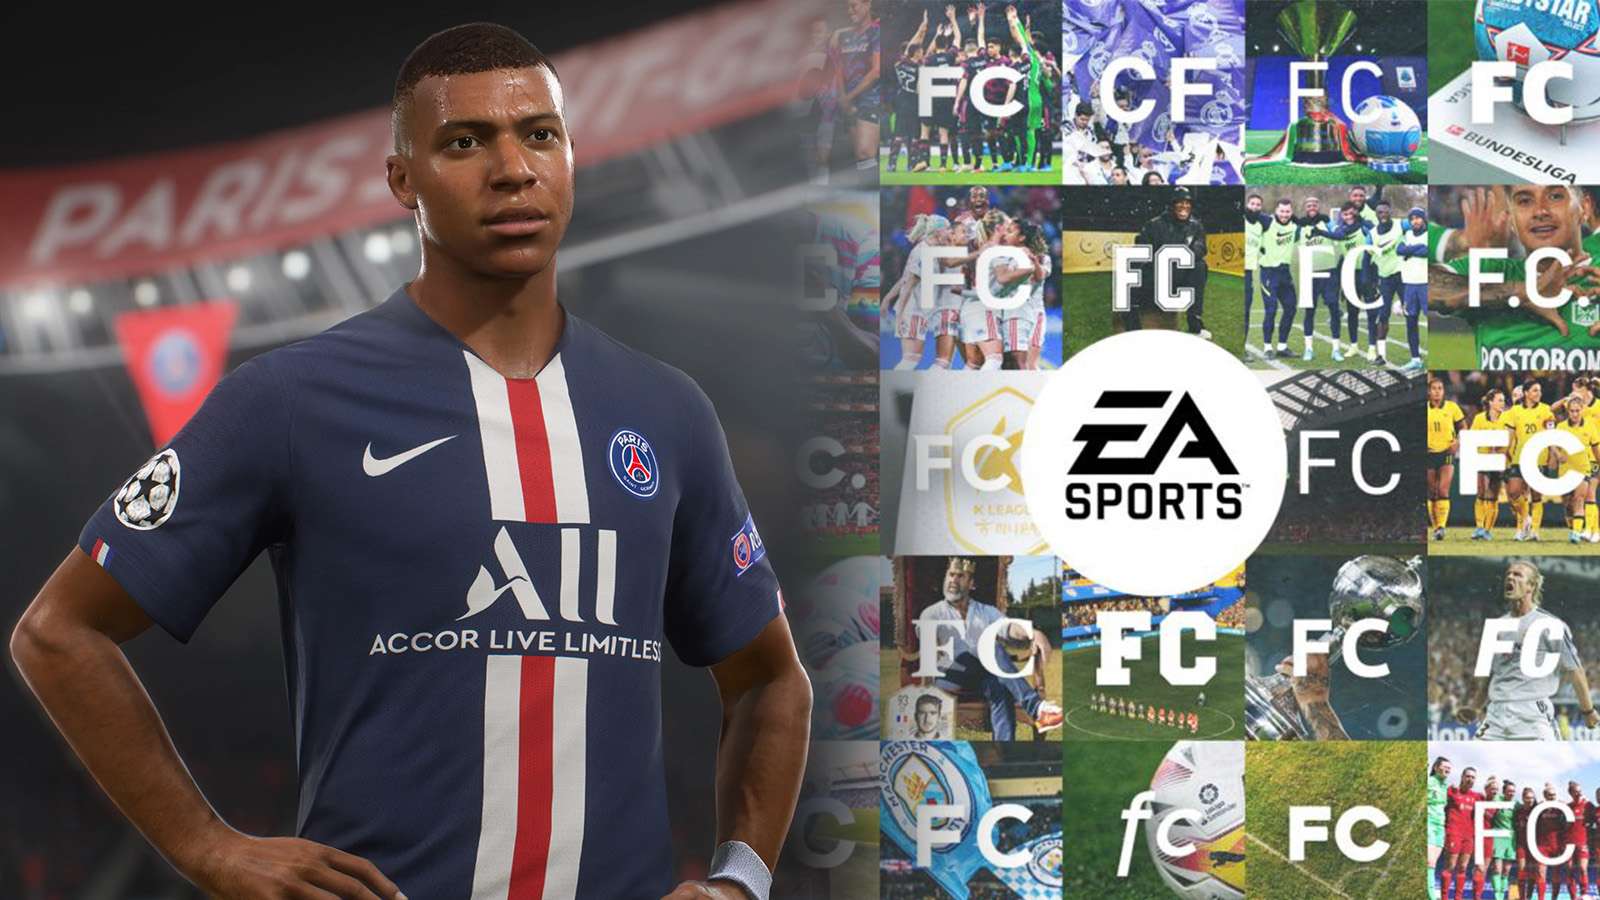 Mbappe with EA Sports FC logo